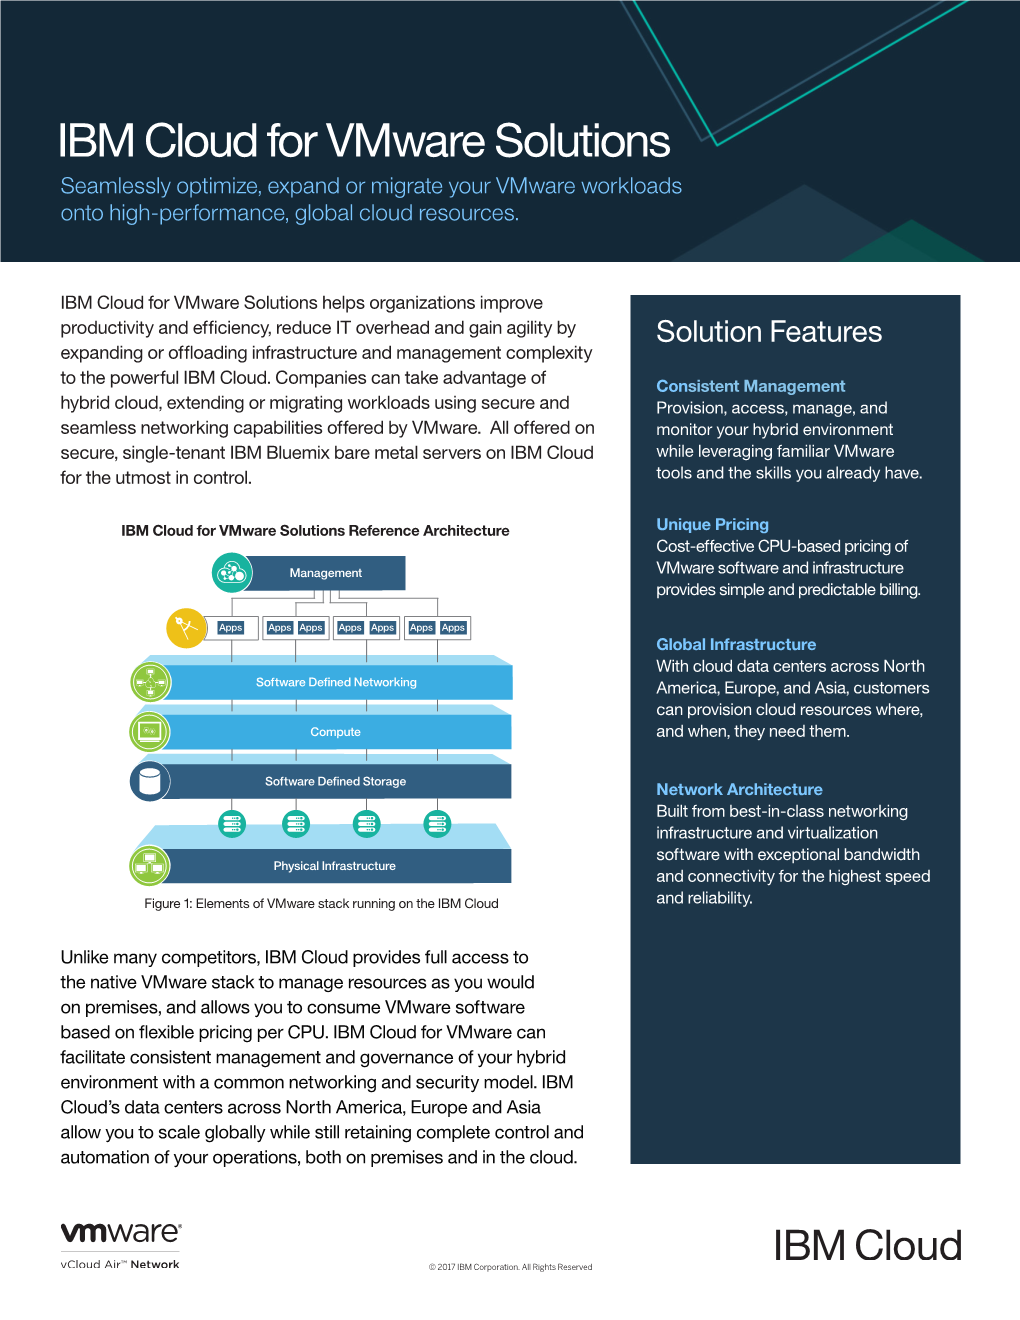 IBM Cloud for Vmware Solutions Seamlessly Optimize, Expand Or Migrate Your Vmware Workloads Onto High-Performance, Global Cloud Resources